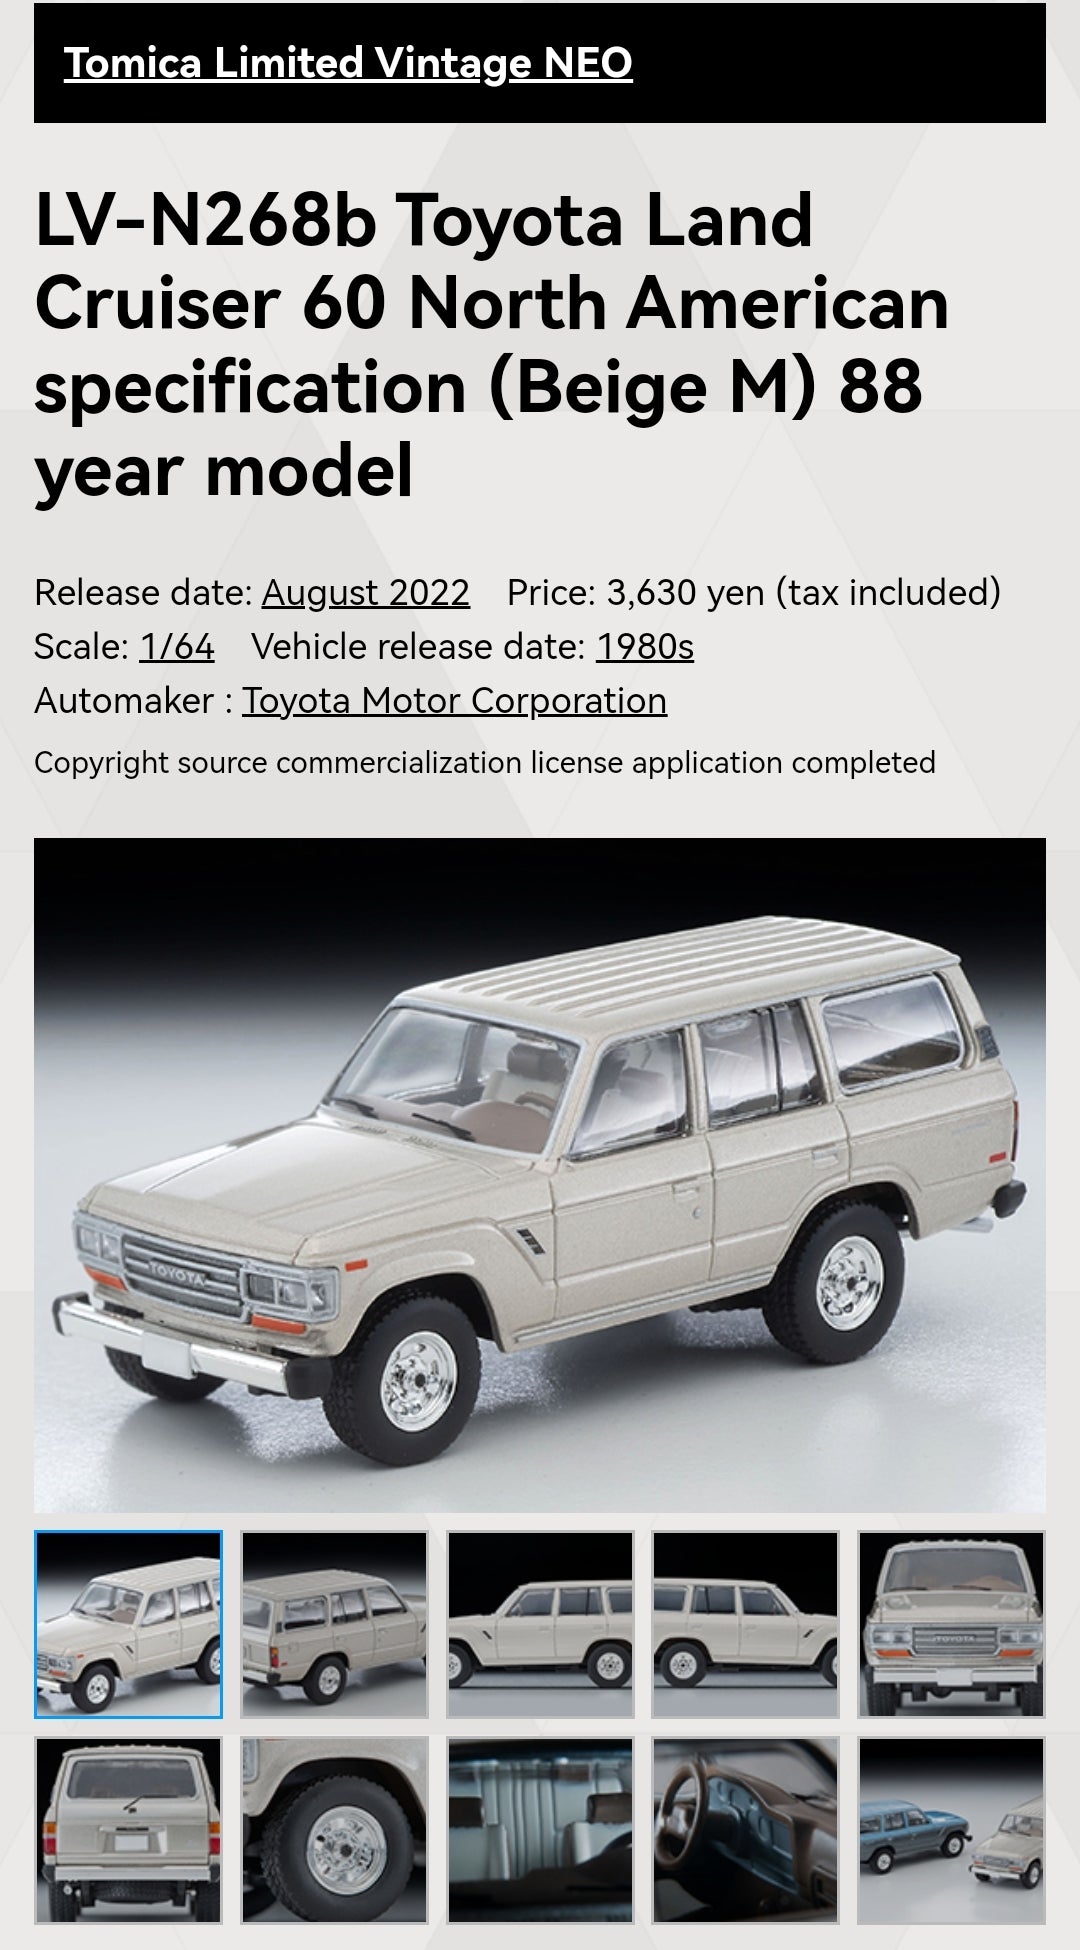 Tomica Limited Vintage Neo LV-N268b Toyota Land Cruiser 60 North American specification (Beige M) 88 year model